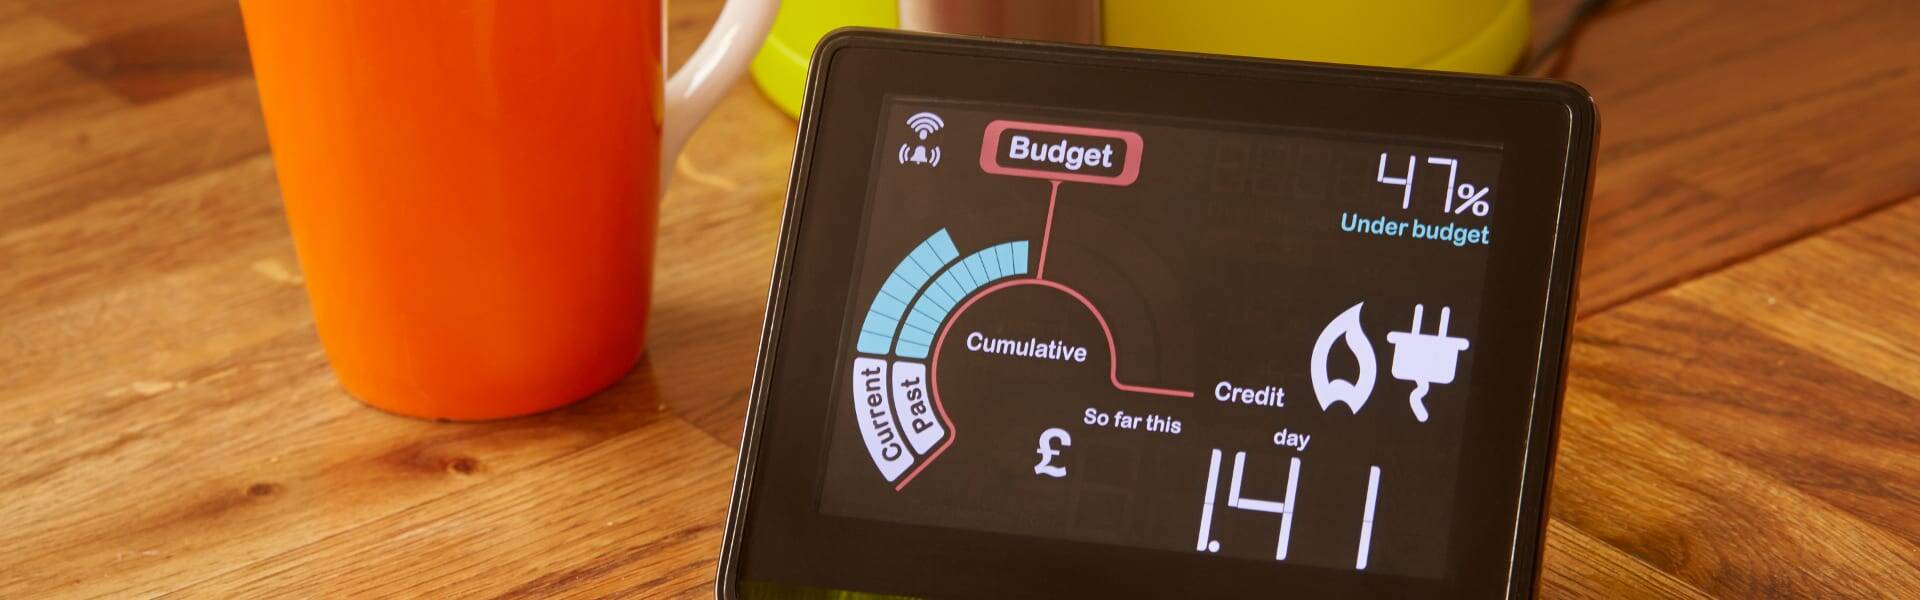 Smart meters have ‘positive impact’ on behaviour, report claims